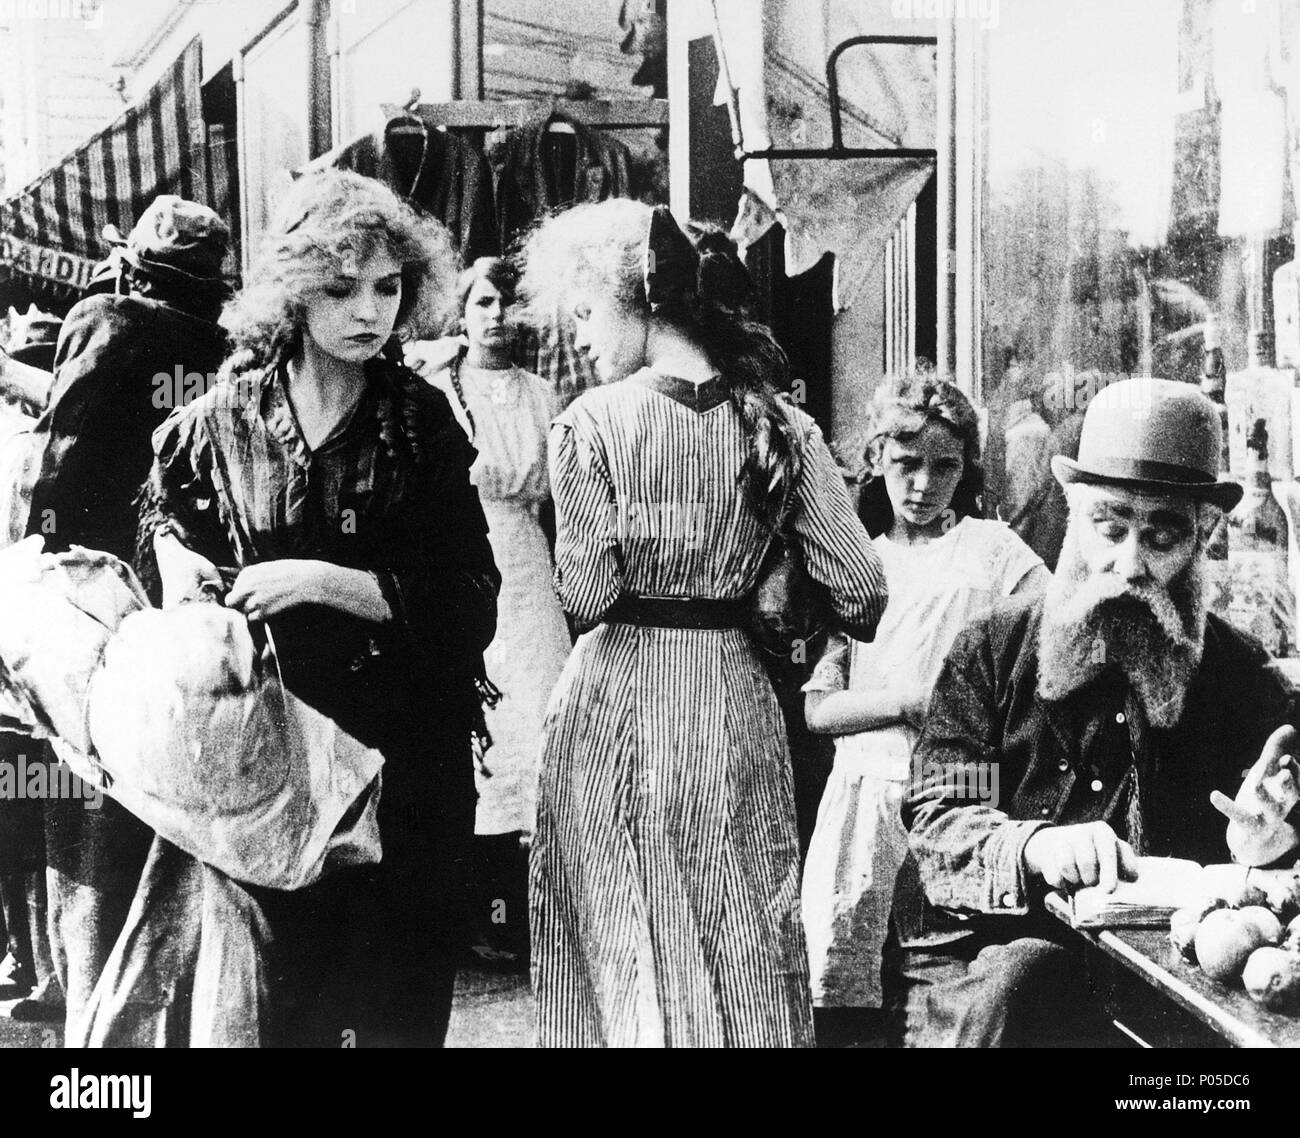 Original Film Title: MUSKETEERS OF PIG ALLEY.  English Title: MUSKETEERS OF PIG ALLEY.  Film Director: D. W. GRIFFITH.  Year: 1912.  Stars: LILLIAN GISH. Stock Photo